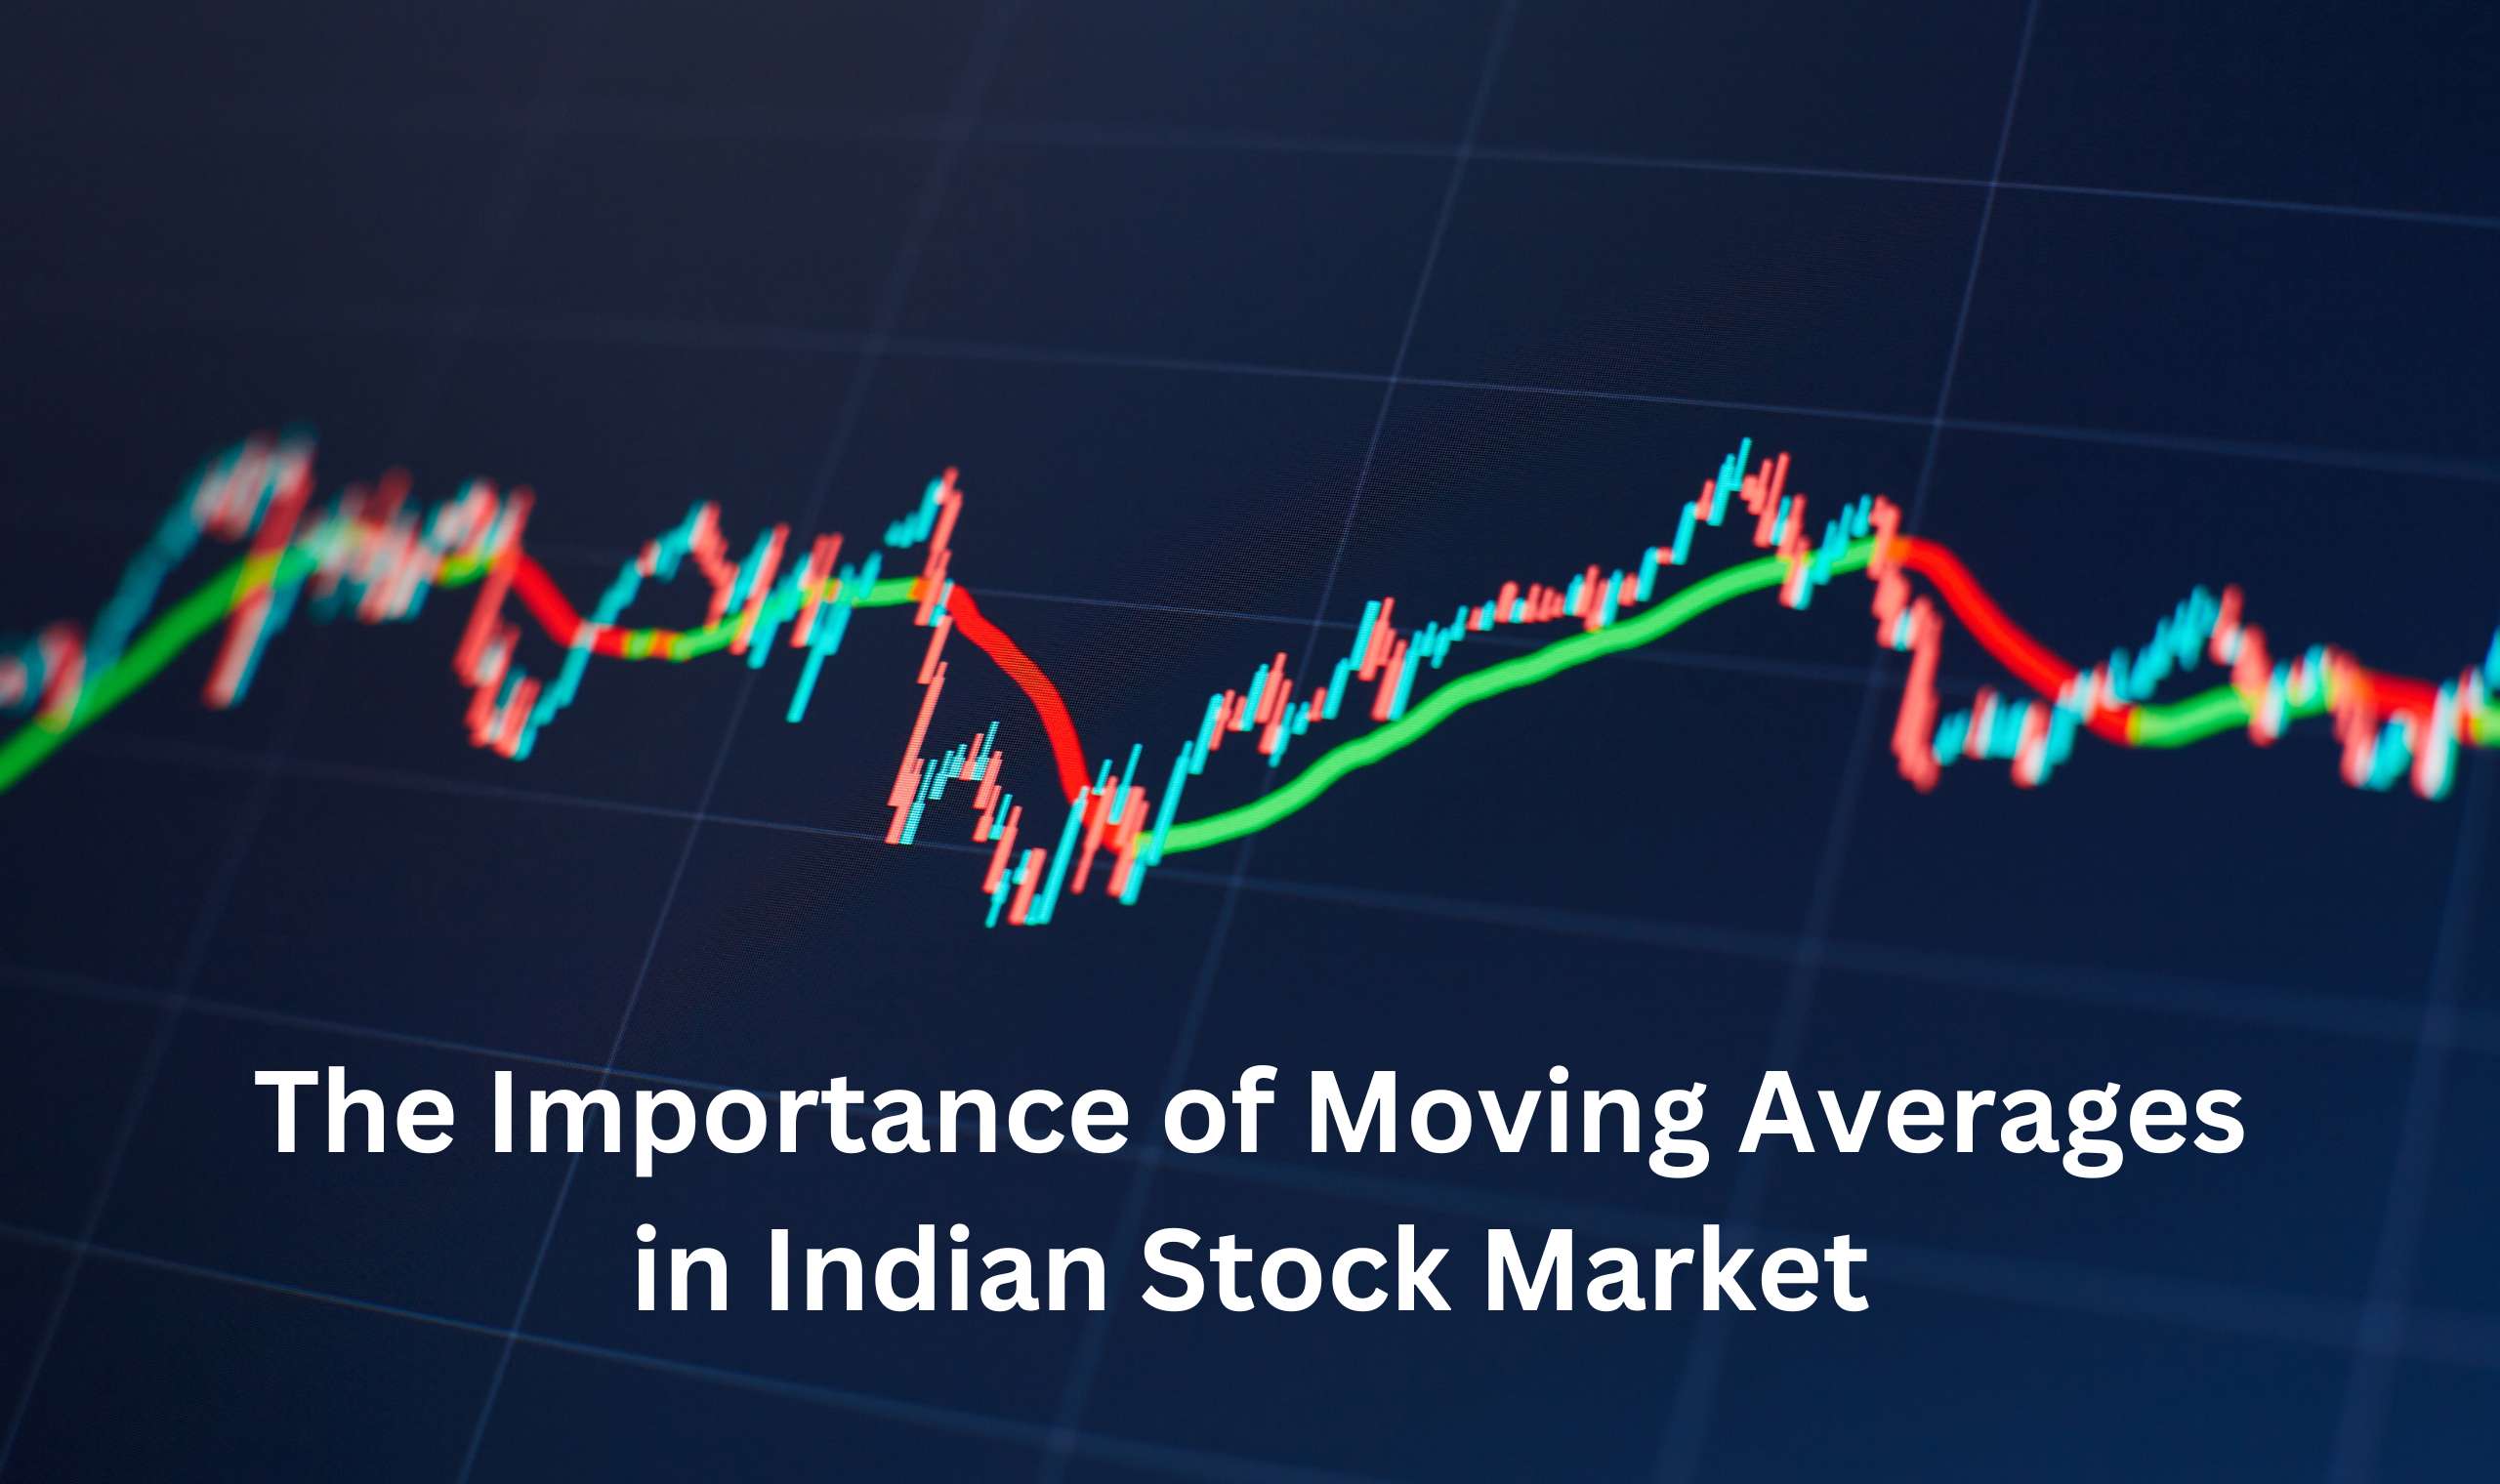 The Importance of Moving Averages in Indian Stock Market Analysis